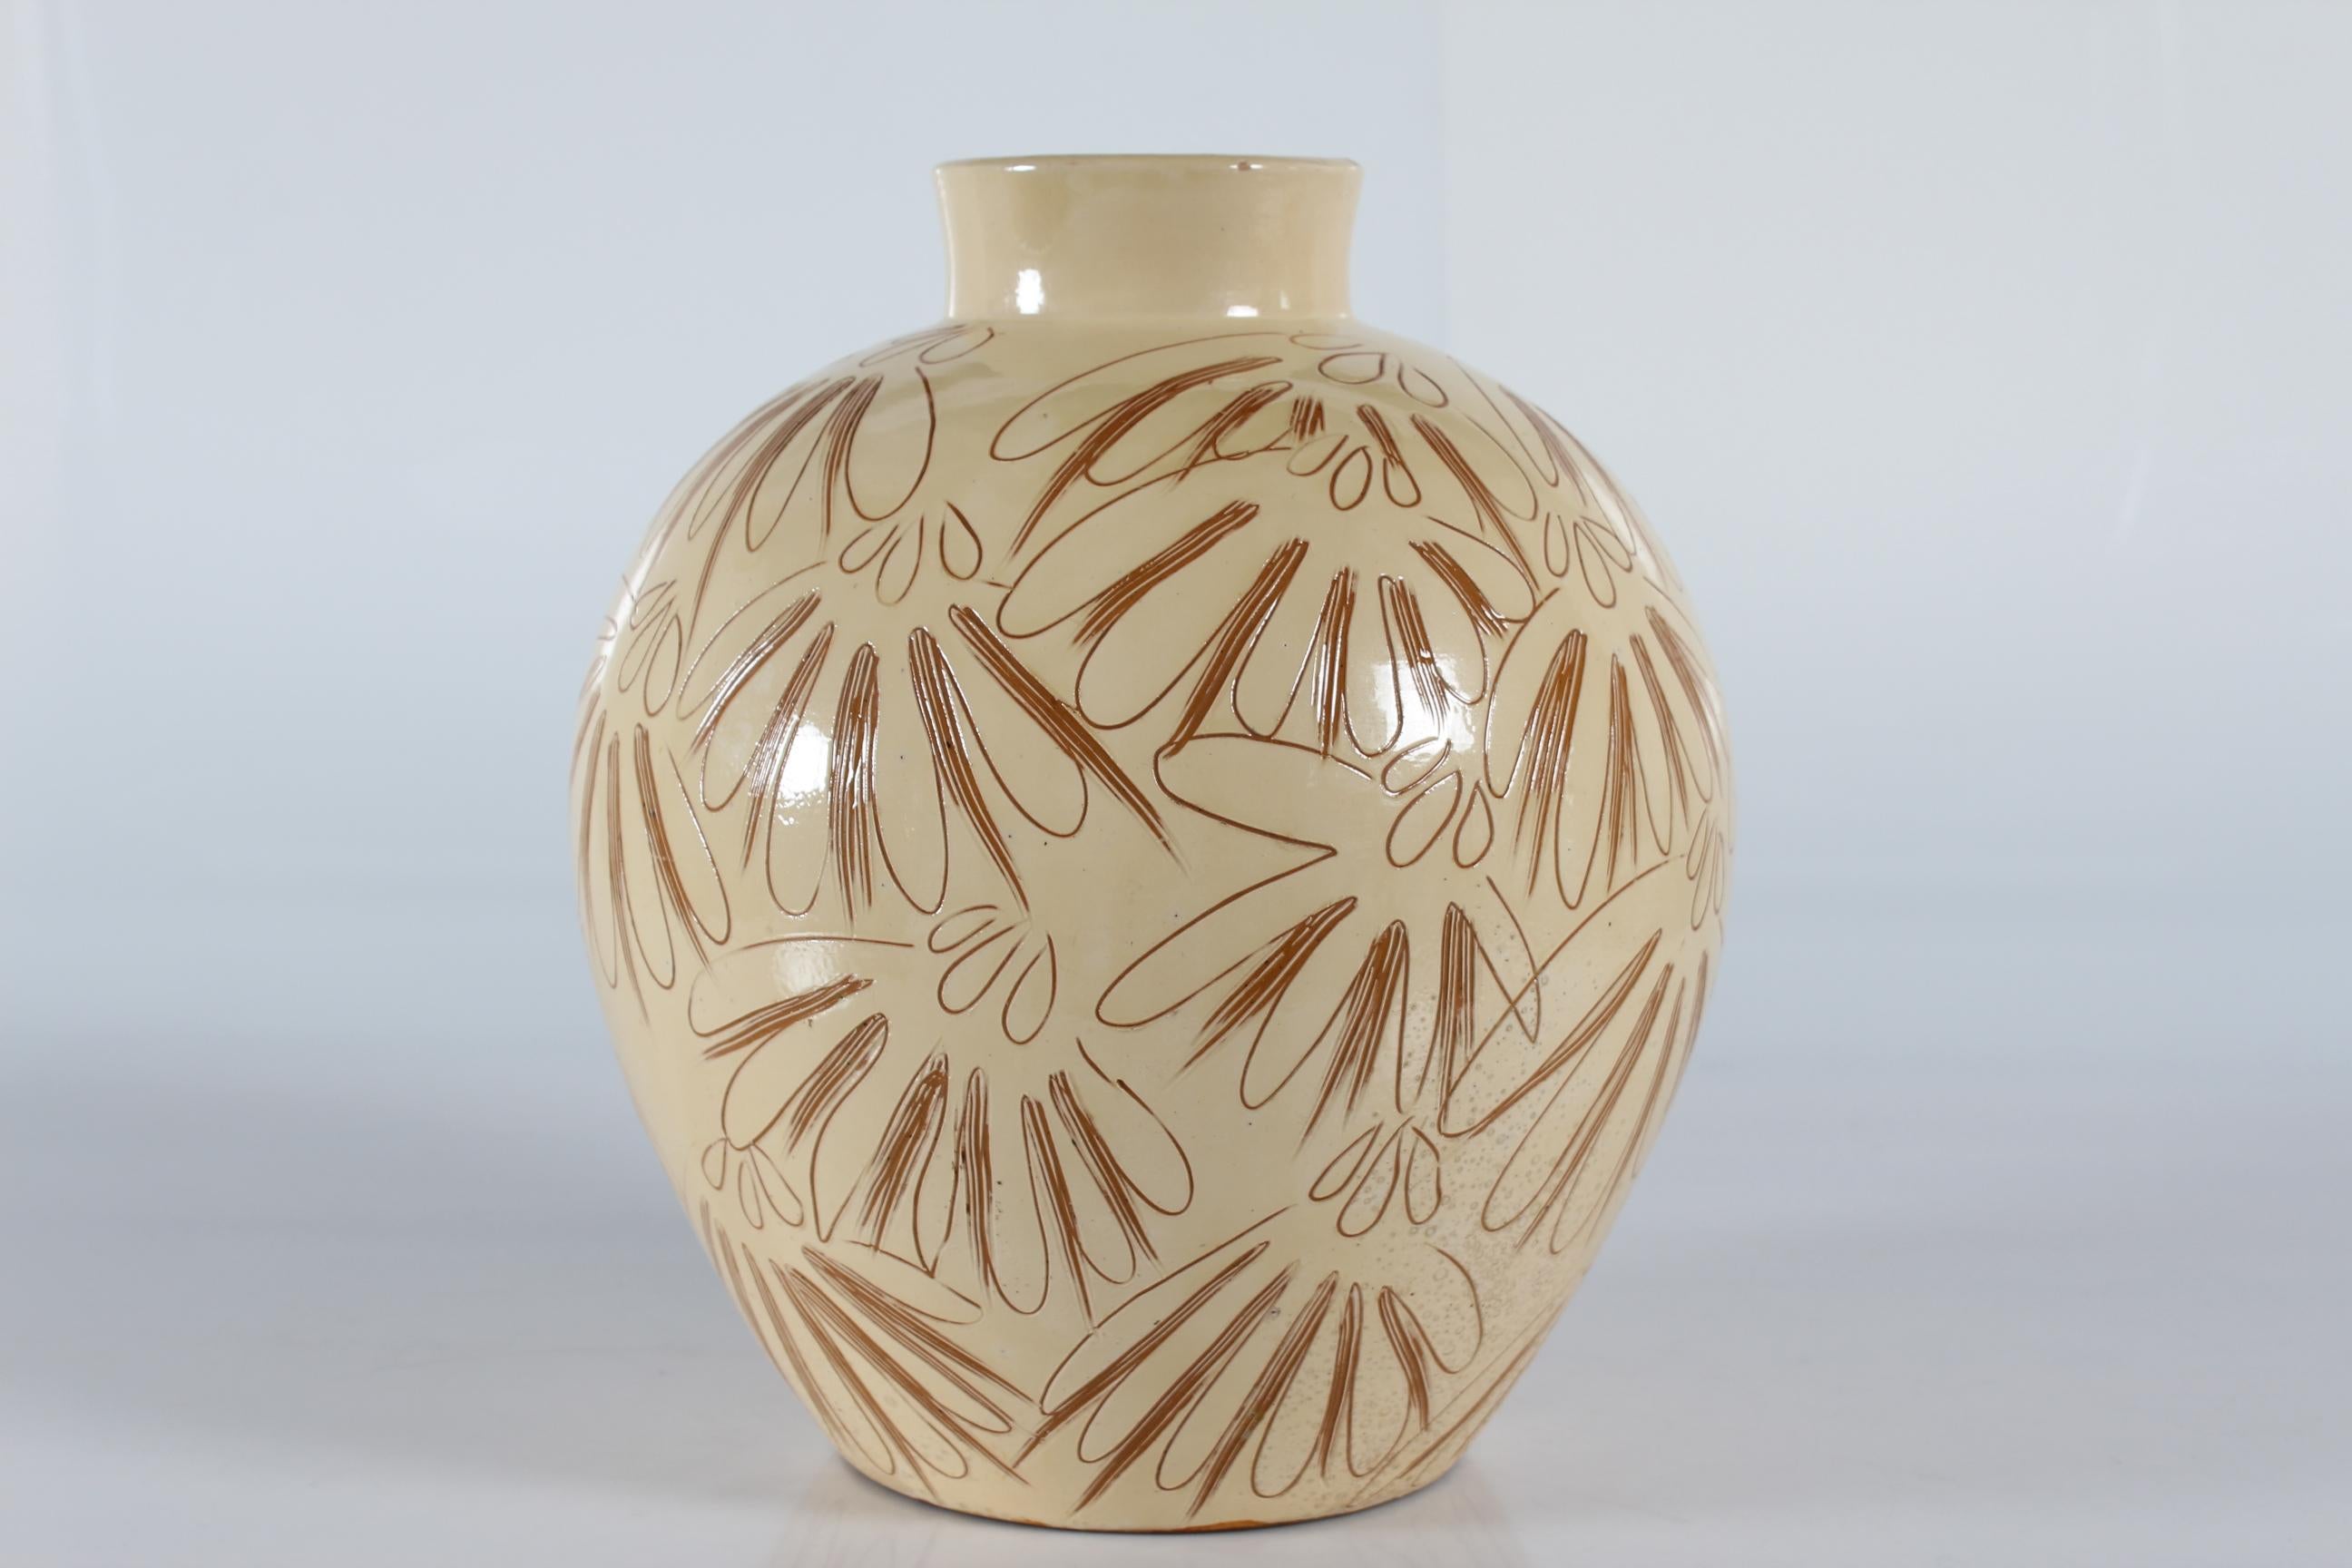 Huge Danish ceramic floor vase made by Herman A. Kähler 1940-50s.
The floor vase has a cream yellow basecoat with incised decoration where the color of the brown clay show. The technique is called Sgraffito.
This technique was used during the Second